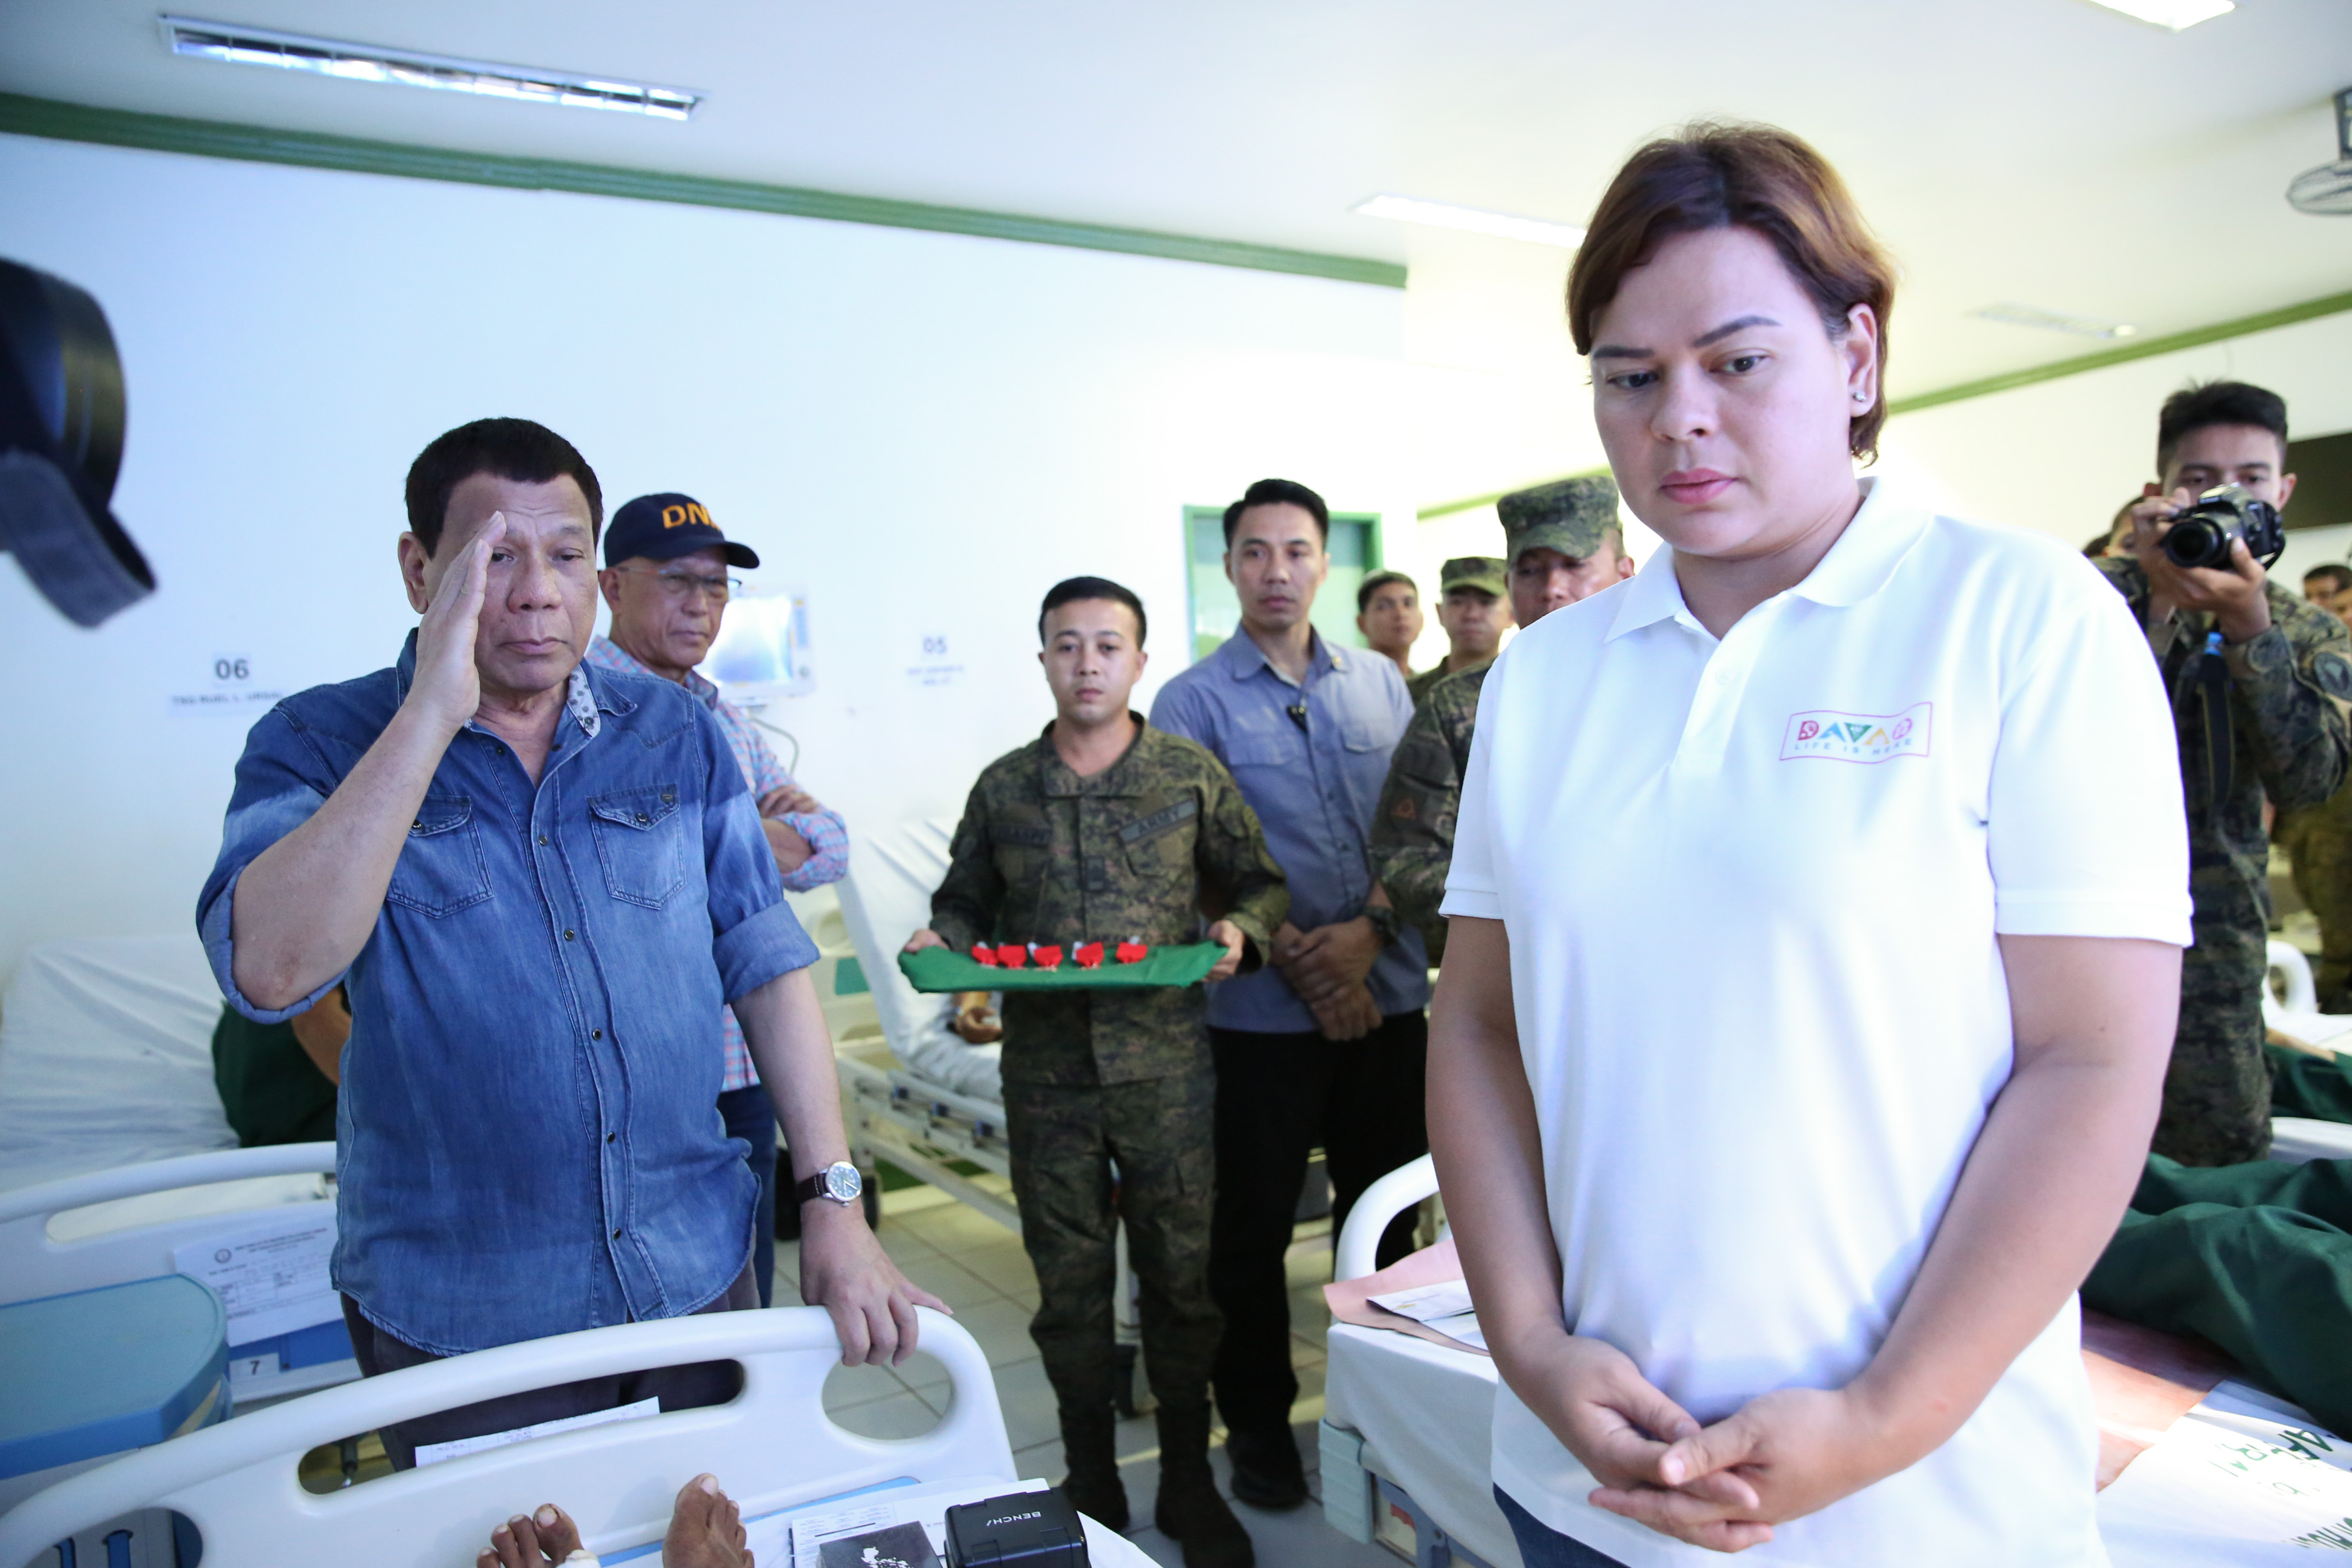 FATHER AND DAUGHTER. President Rodrigo Roa Duterte visits wounded soldiers at Camp Teodulfo Bautista in Jolo, Sulu on January 28, 2019 with Davao City Mayor Sara Duterte-Carpio. Photo by Albert Alcain/Presidential Photo  